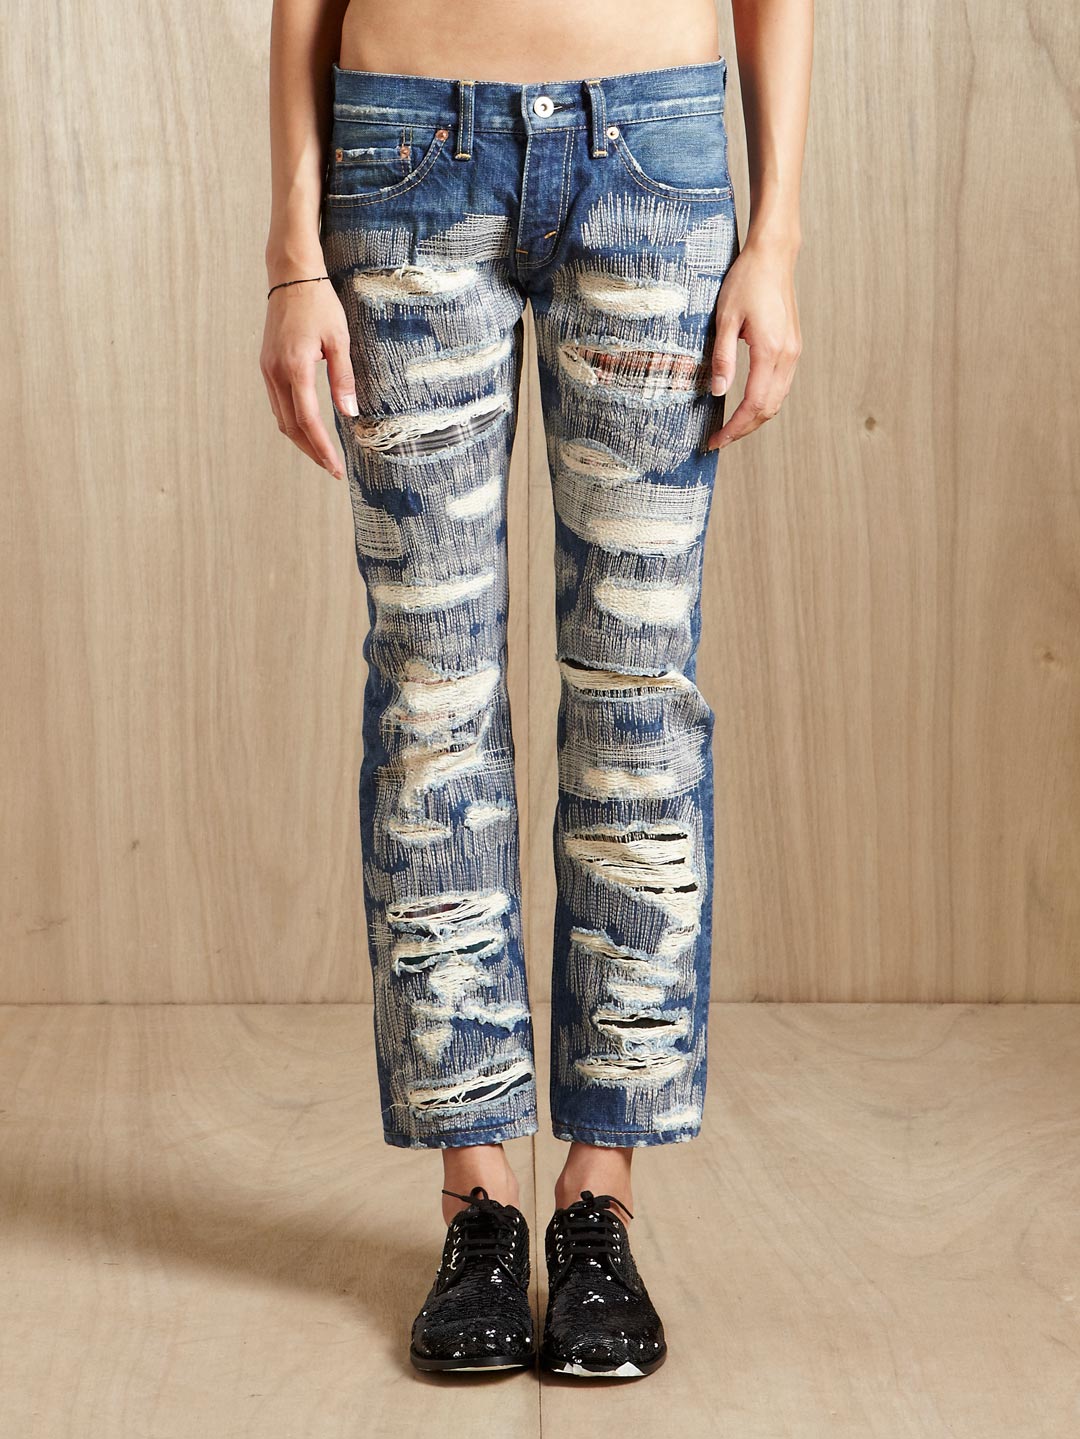 Lyst - Junya Watanabe Womens Distressed Patchwork Jeans in Blue